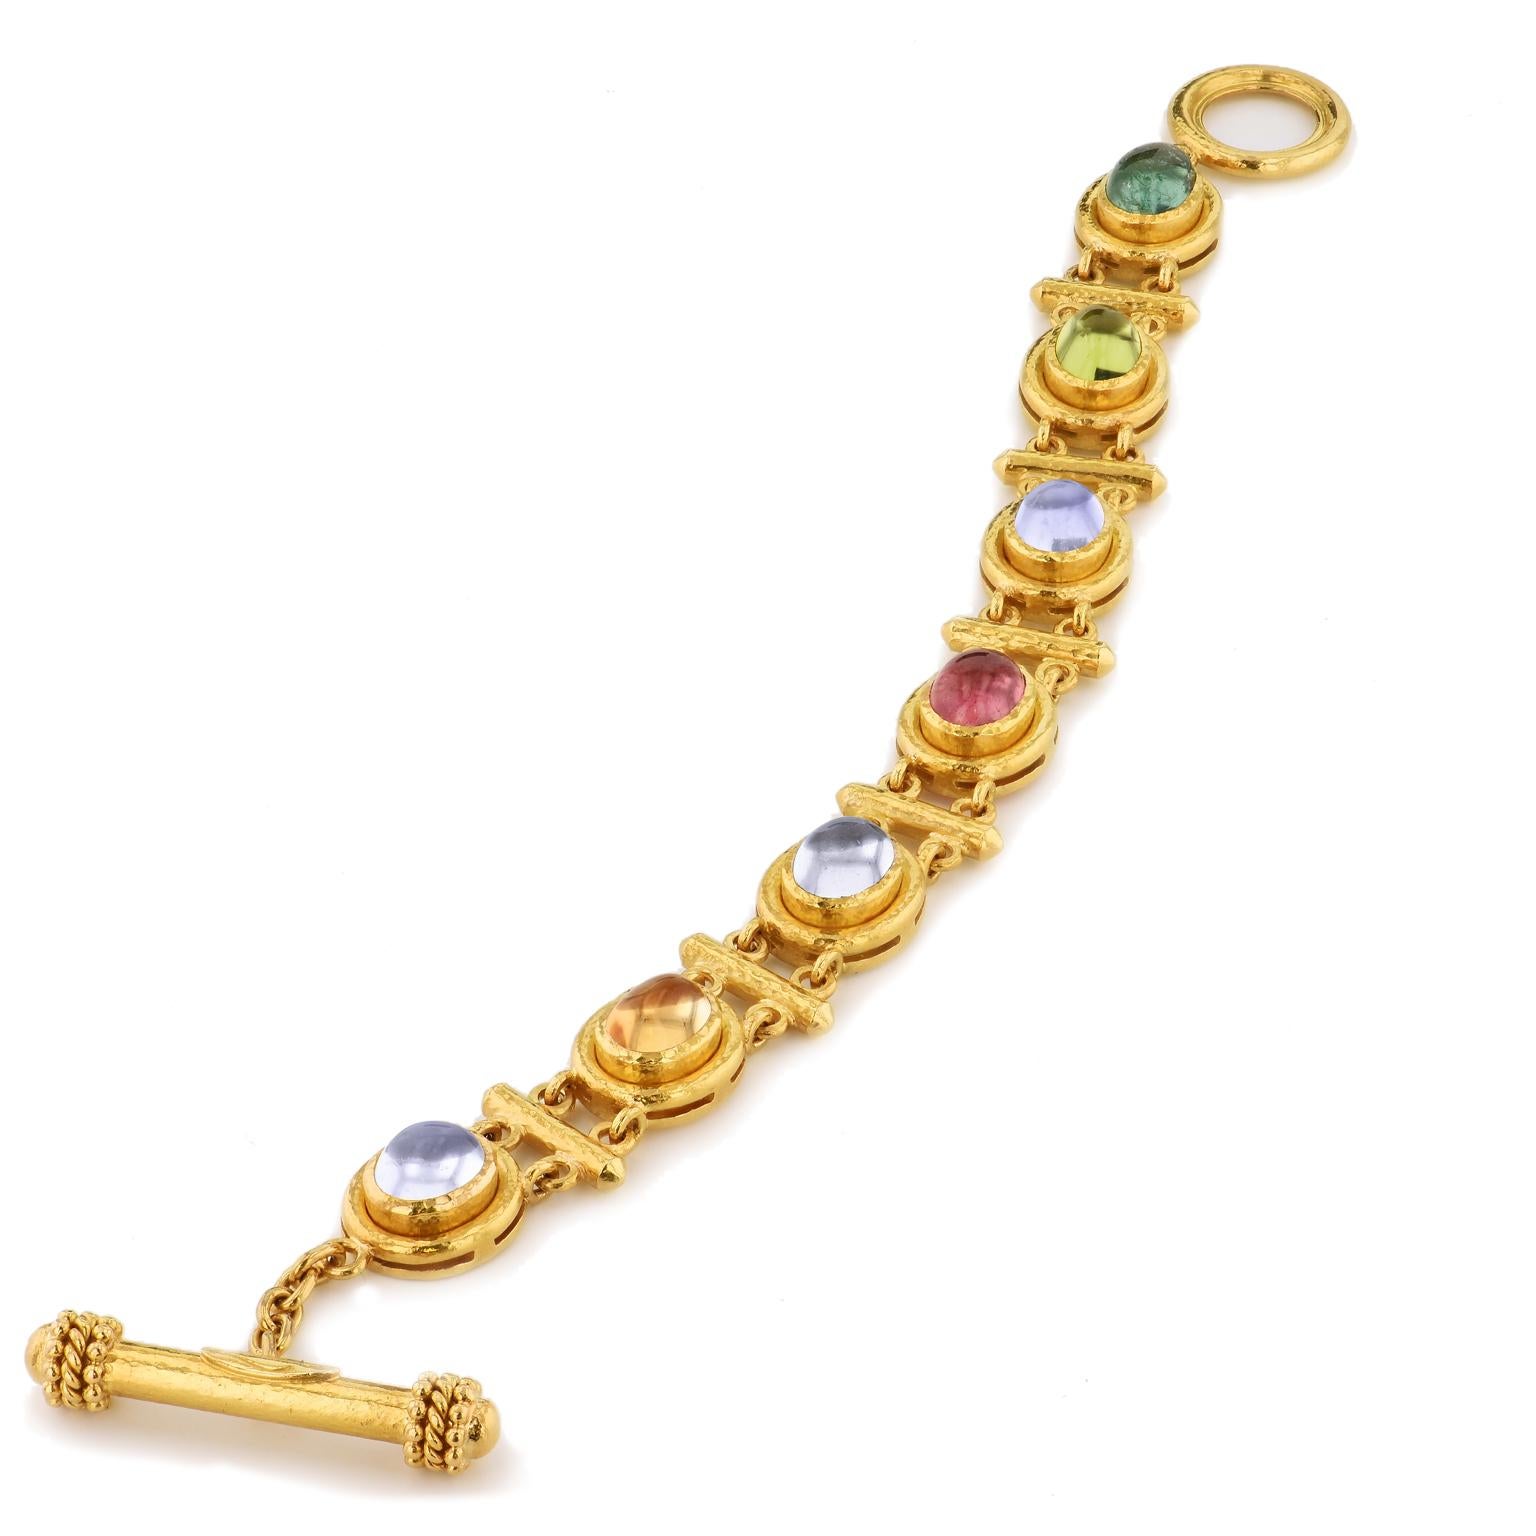 Hammered yellow gold radiates with brazen beauty as seven cabochon moonstone, tourmaline, citrine and peridot illuminate in this previously loved chain-linked Elizabeth Locke 19 karat yellow gold toggle bracelet.